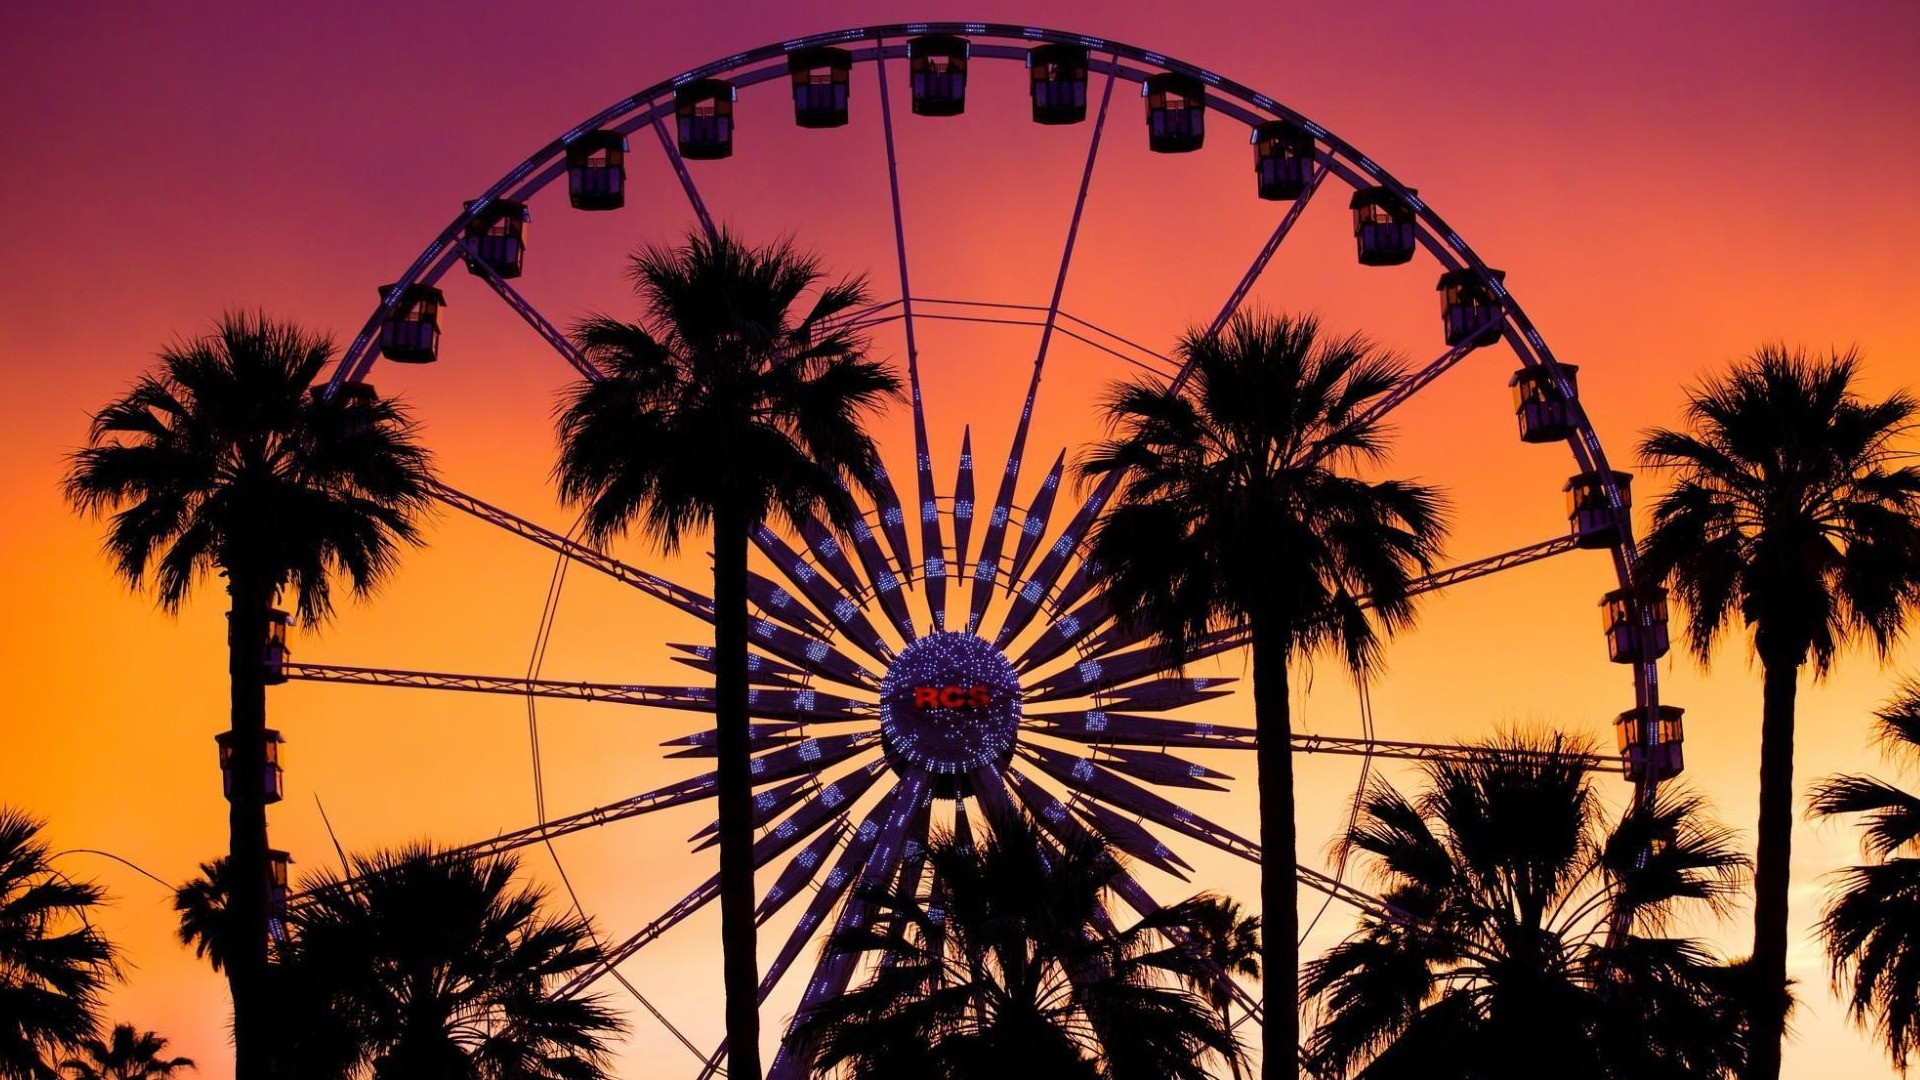 Free download Coachella Valley Music And Arts Festival HD Wallpapers